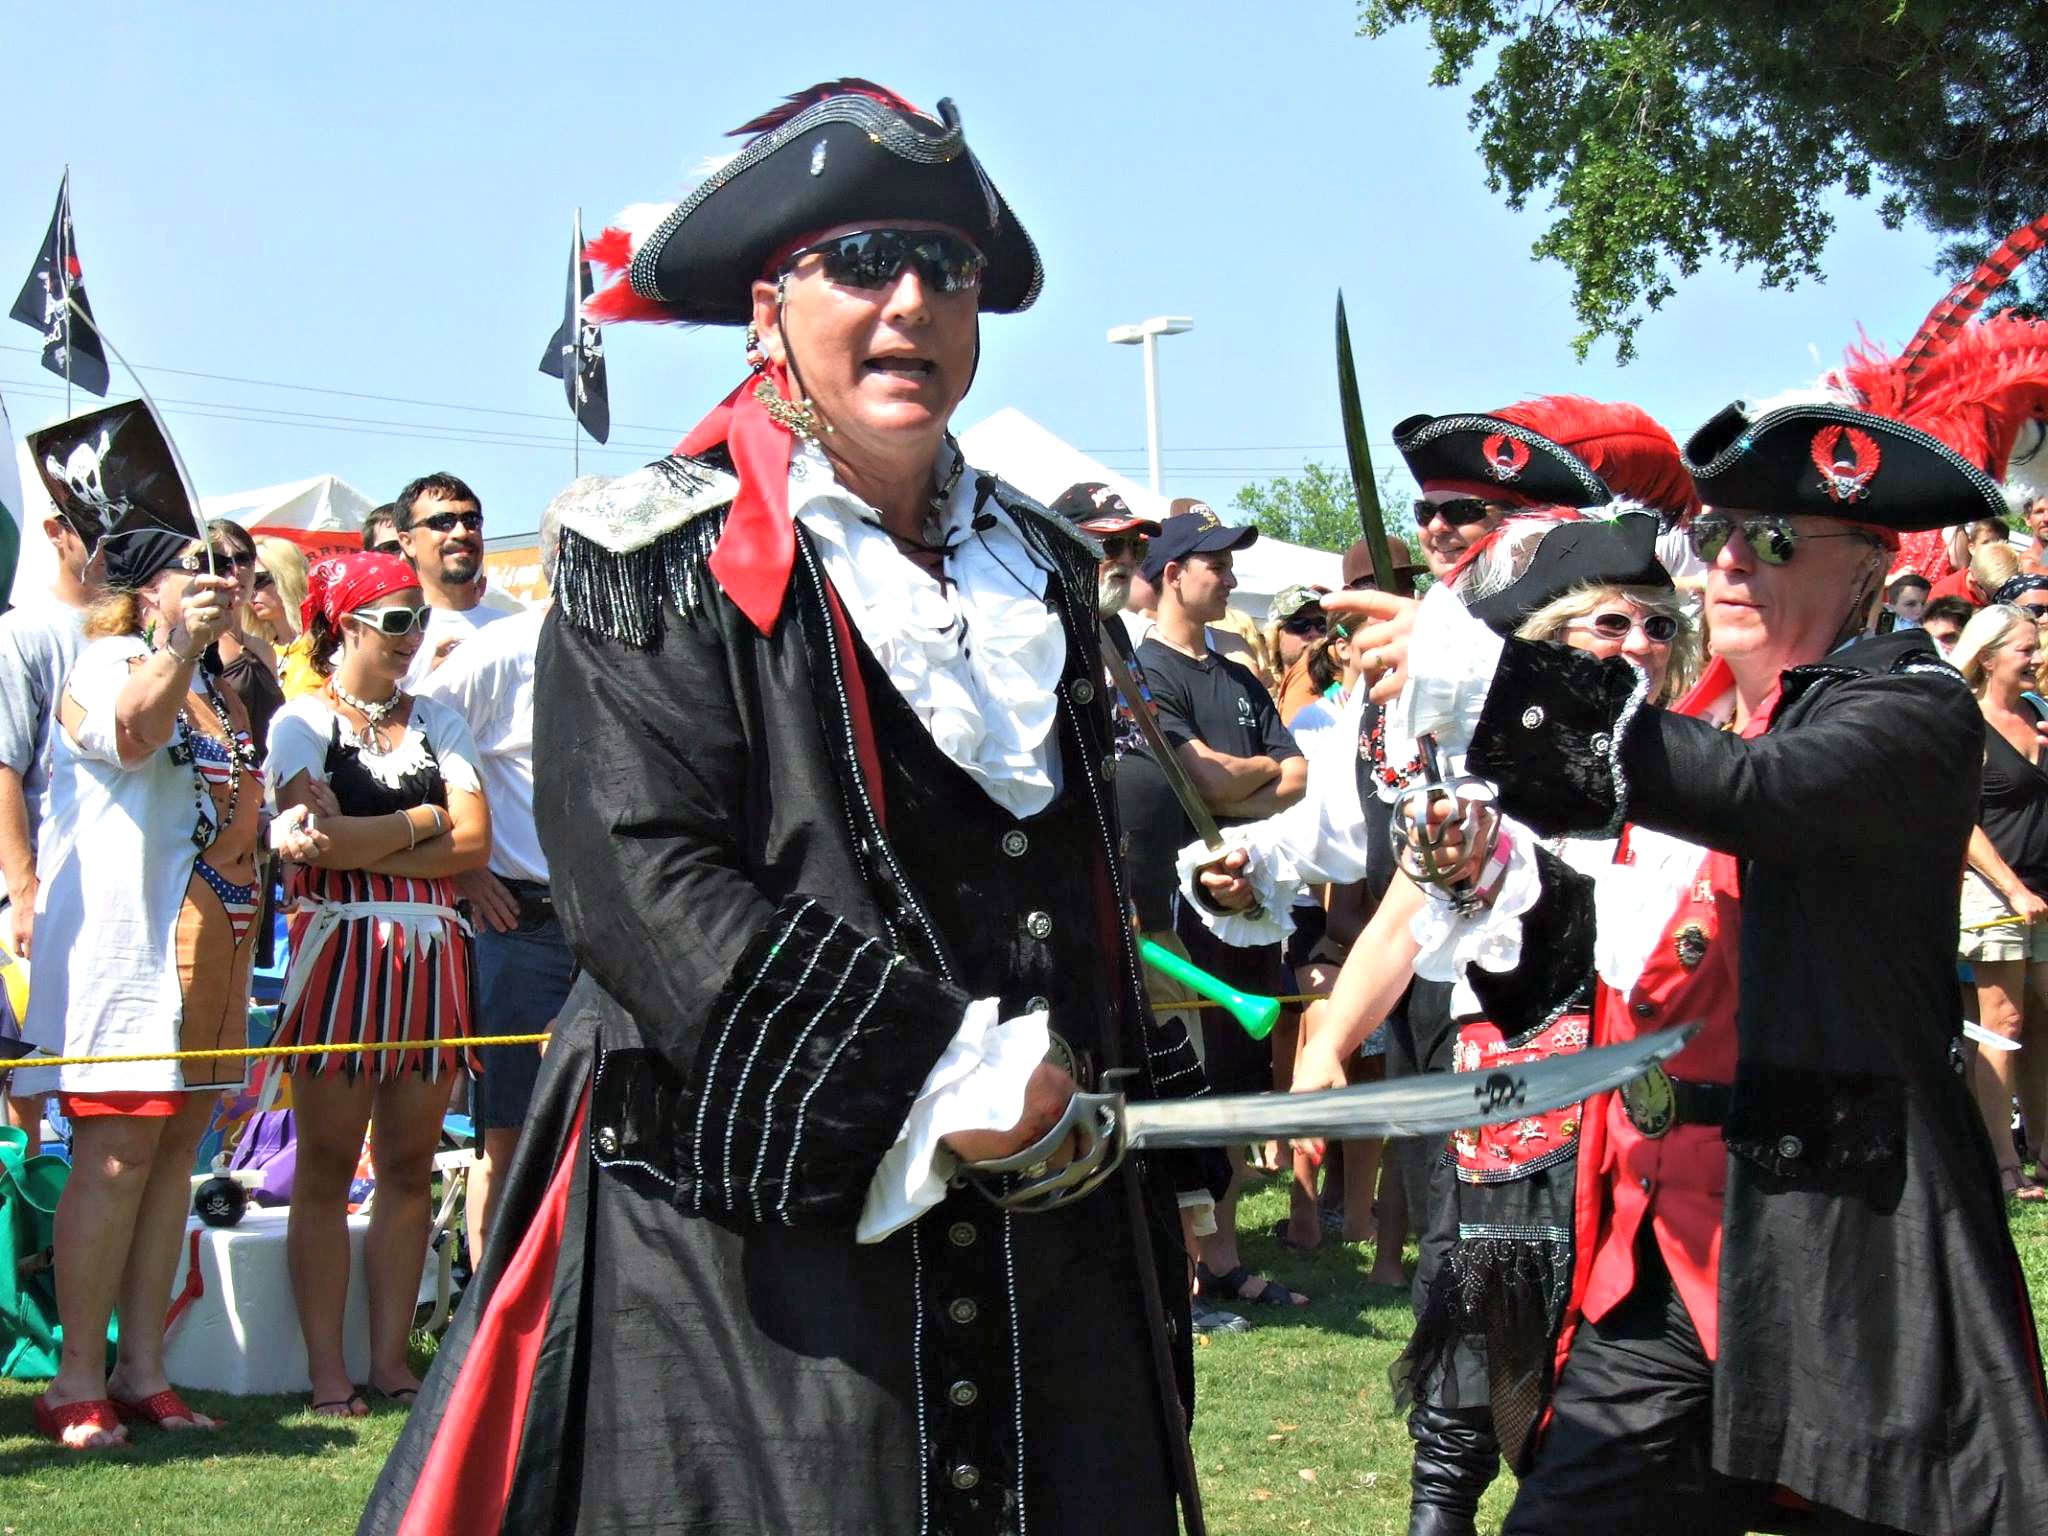 Two pirates skirmish with sword and knife in front of crowd at Billy Bowlegs Festival in Fort Walton